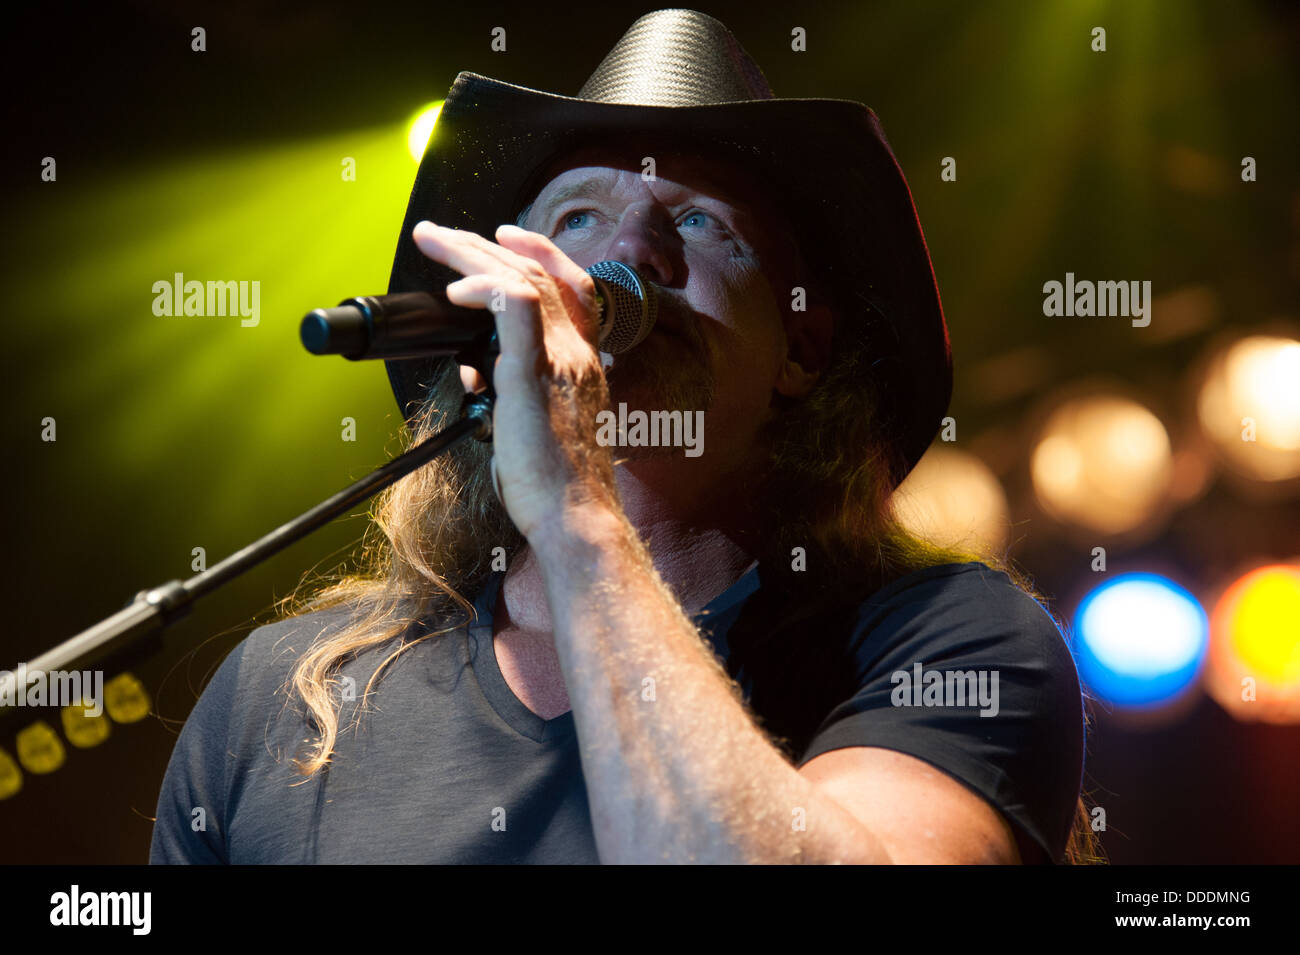 CITRUS HEIGHTS, CA - August 29: Trace Adkins performs at the Sunrise at Night Concert Series at Sunrise Marketplace Stock Photo